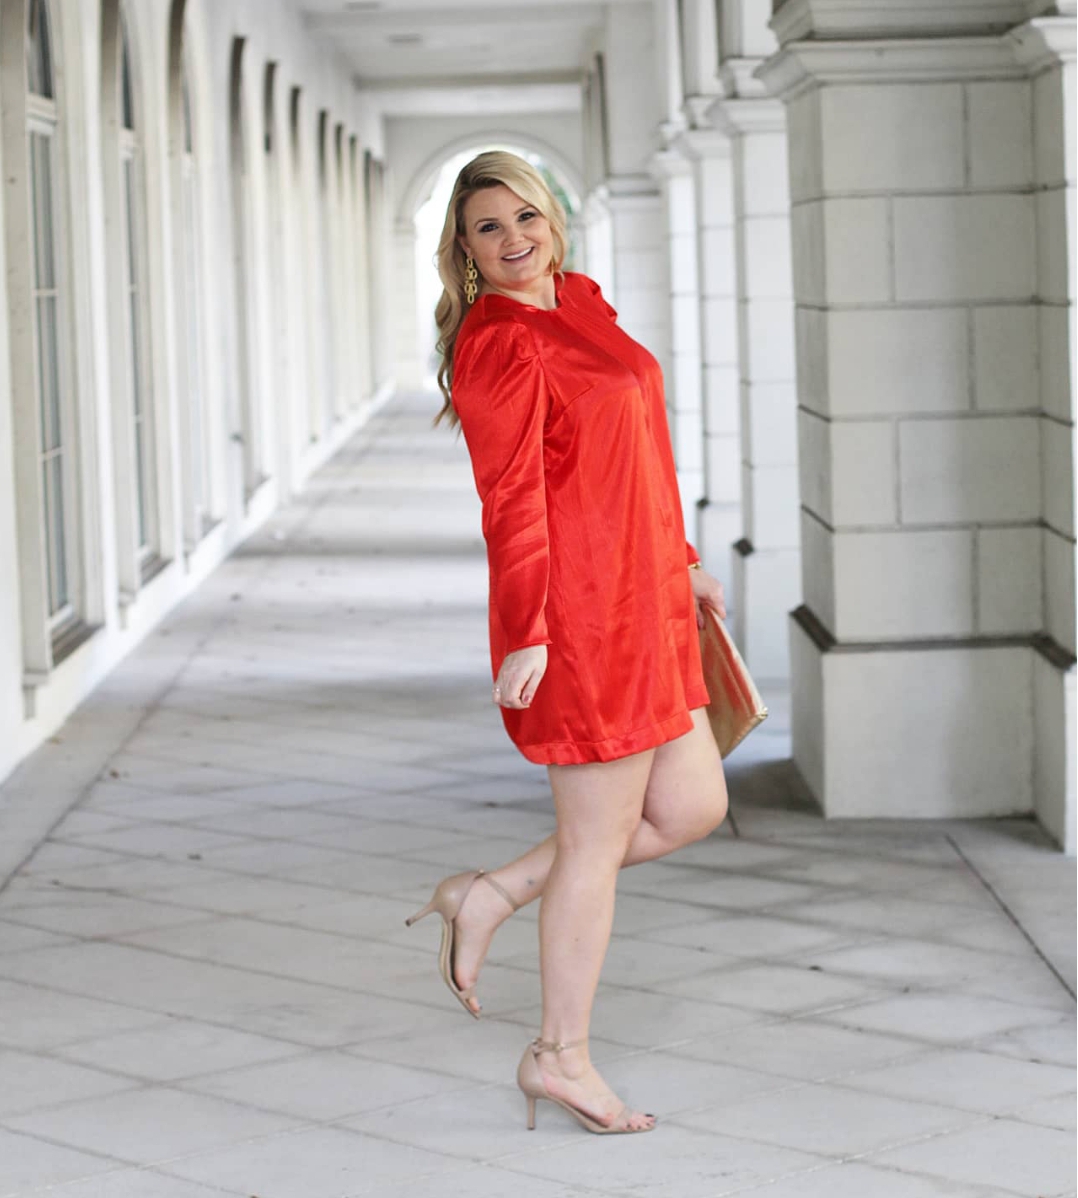 Valentine's Day outfit inspiration featured by Orlando fashion blog, Fabulously Overdressed: image of a woman wearing red dress